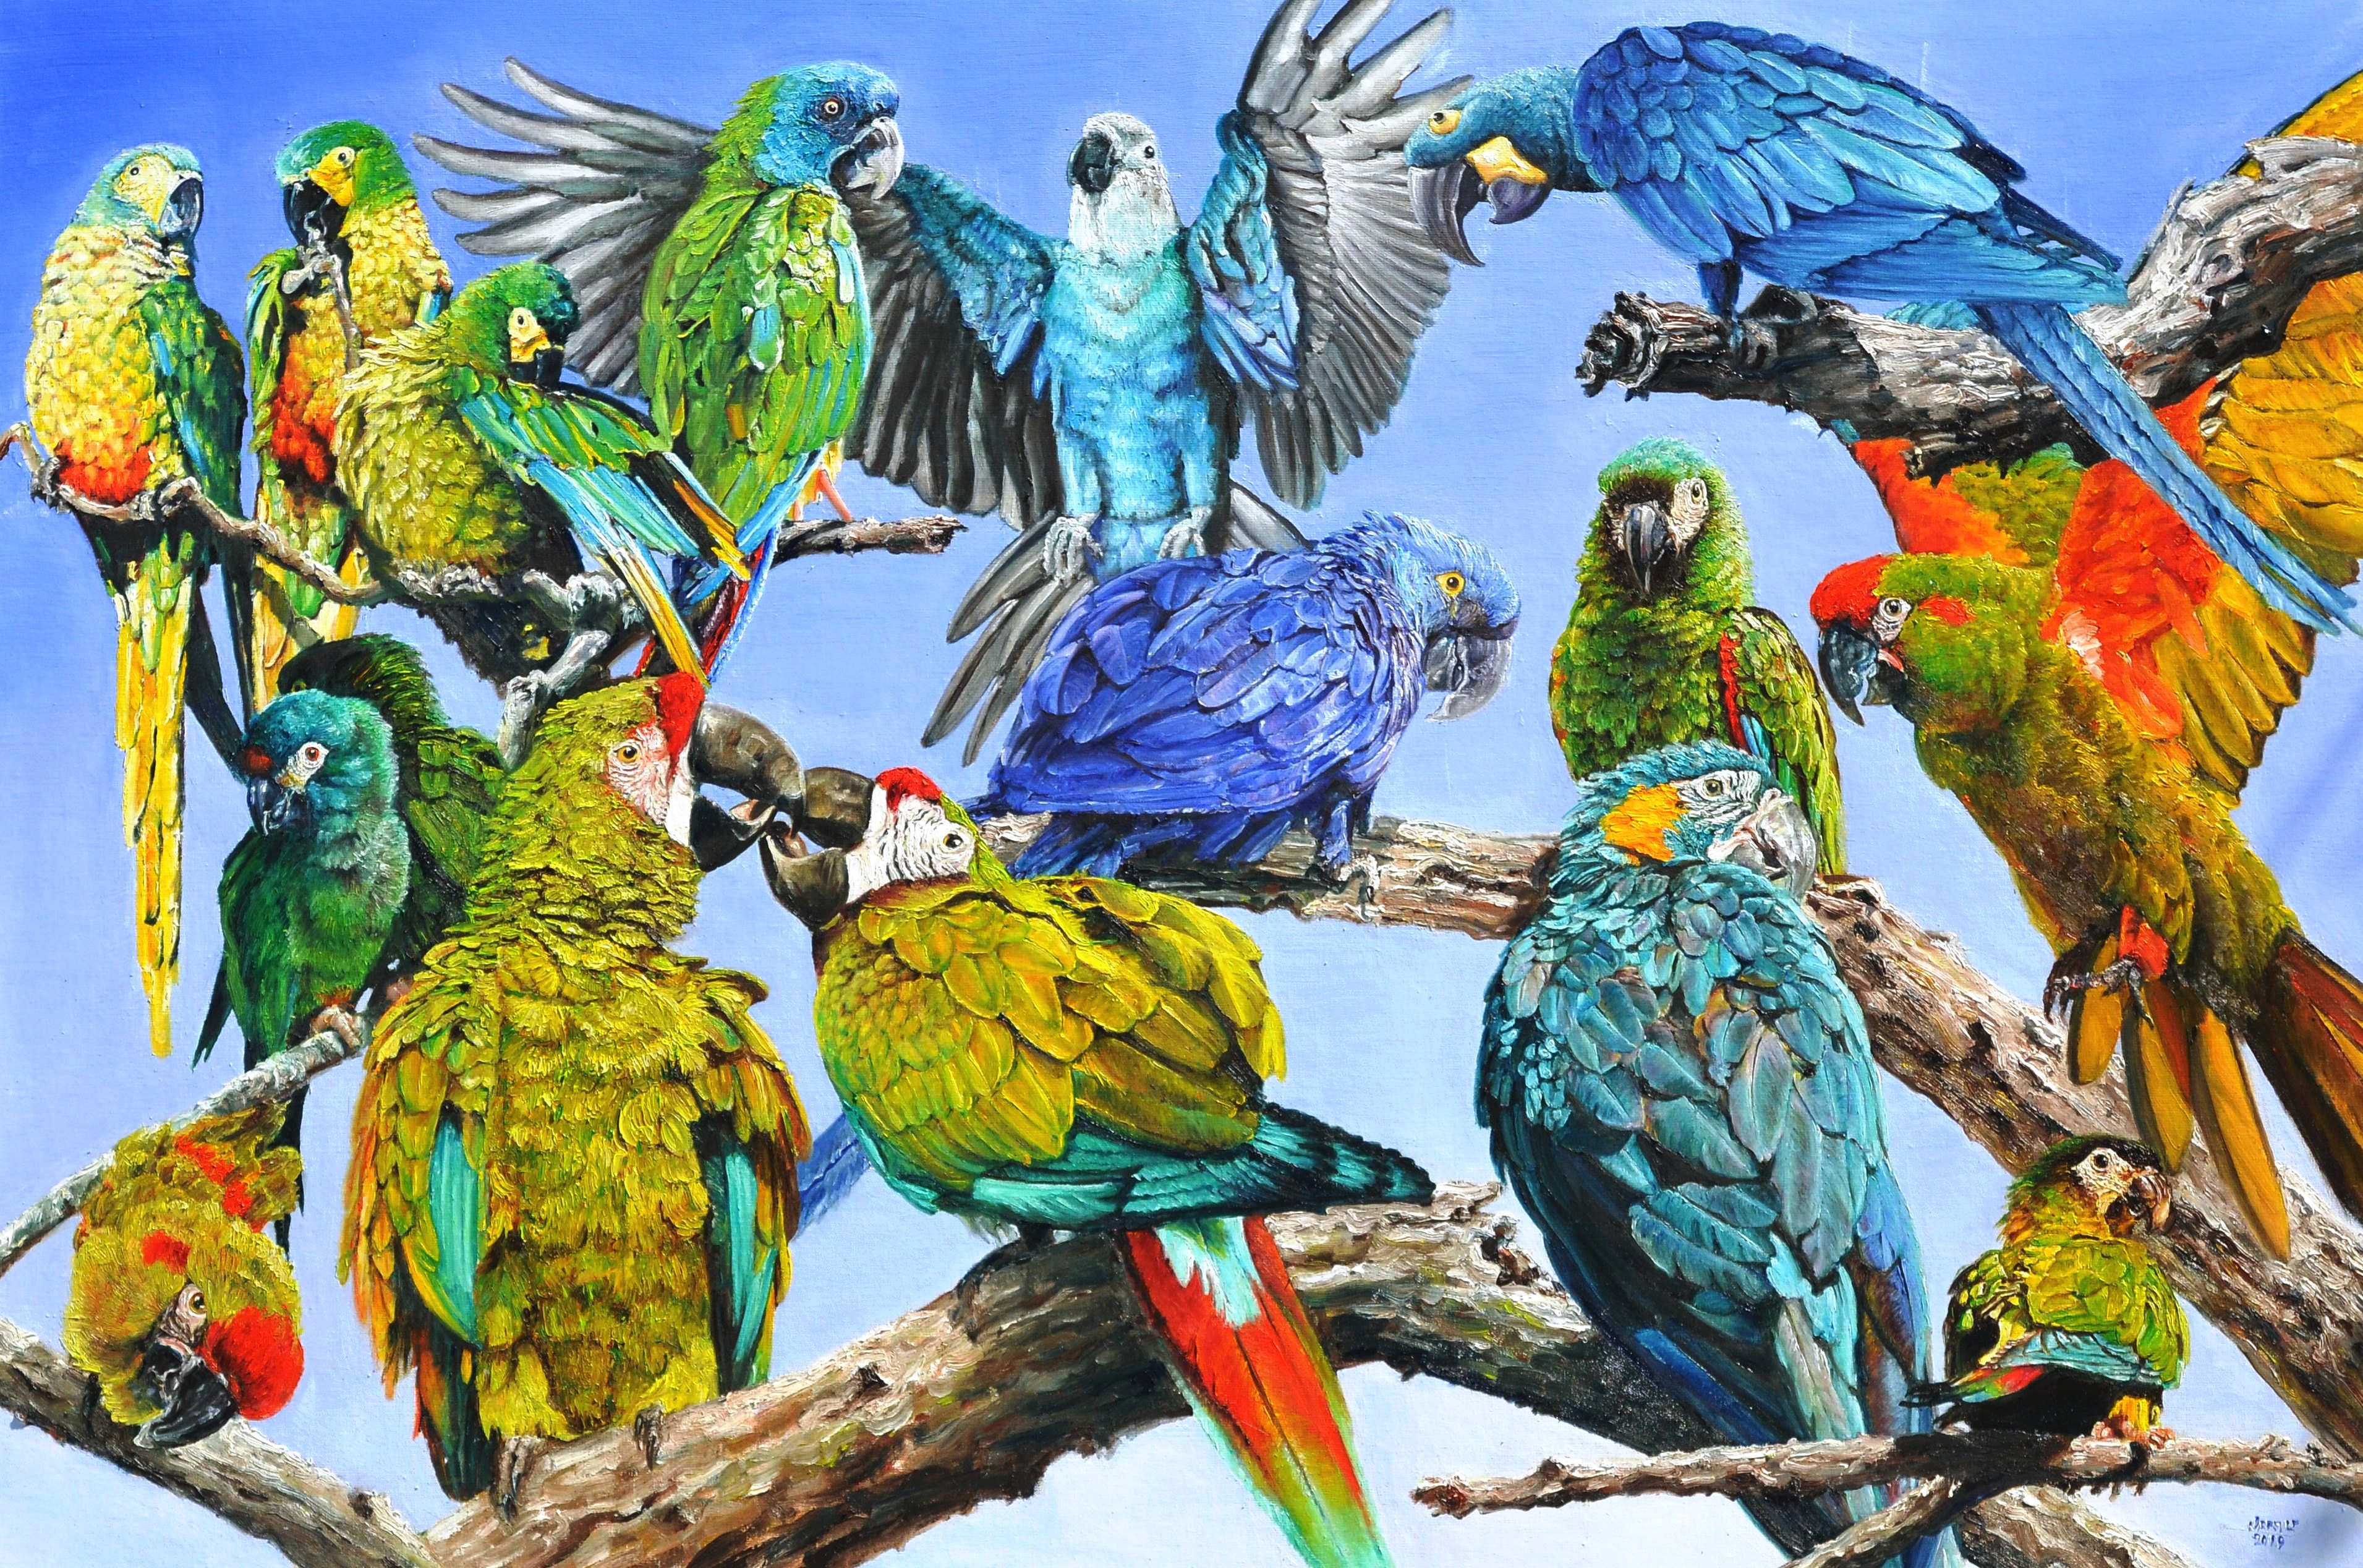 Macaws | Oil paint on linen | Year: 2019 | Dimensions: 100x150cm